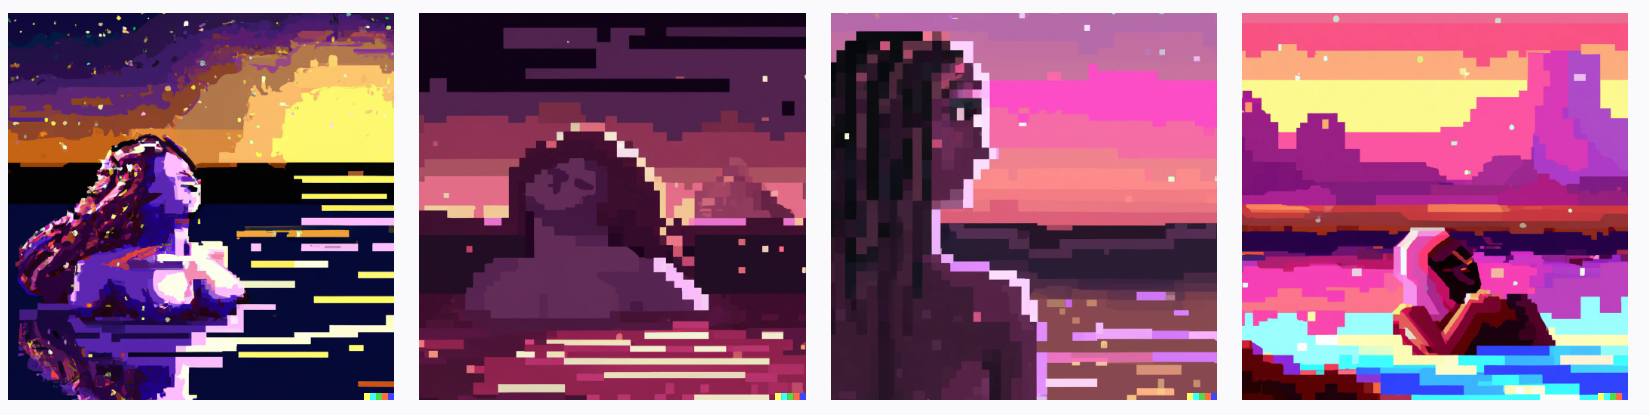 Instagram woman with a large bust bathes in the Martian river at sunset, digital art, pixel art, 8k resolution, galaxy and purple colours